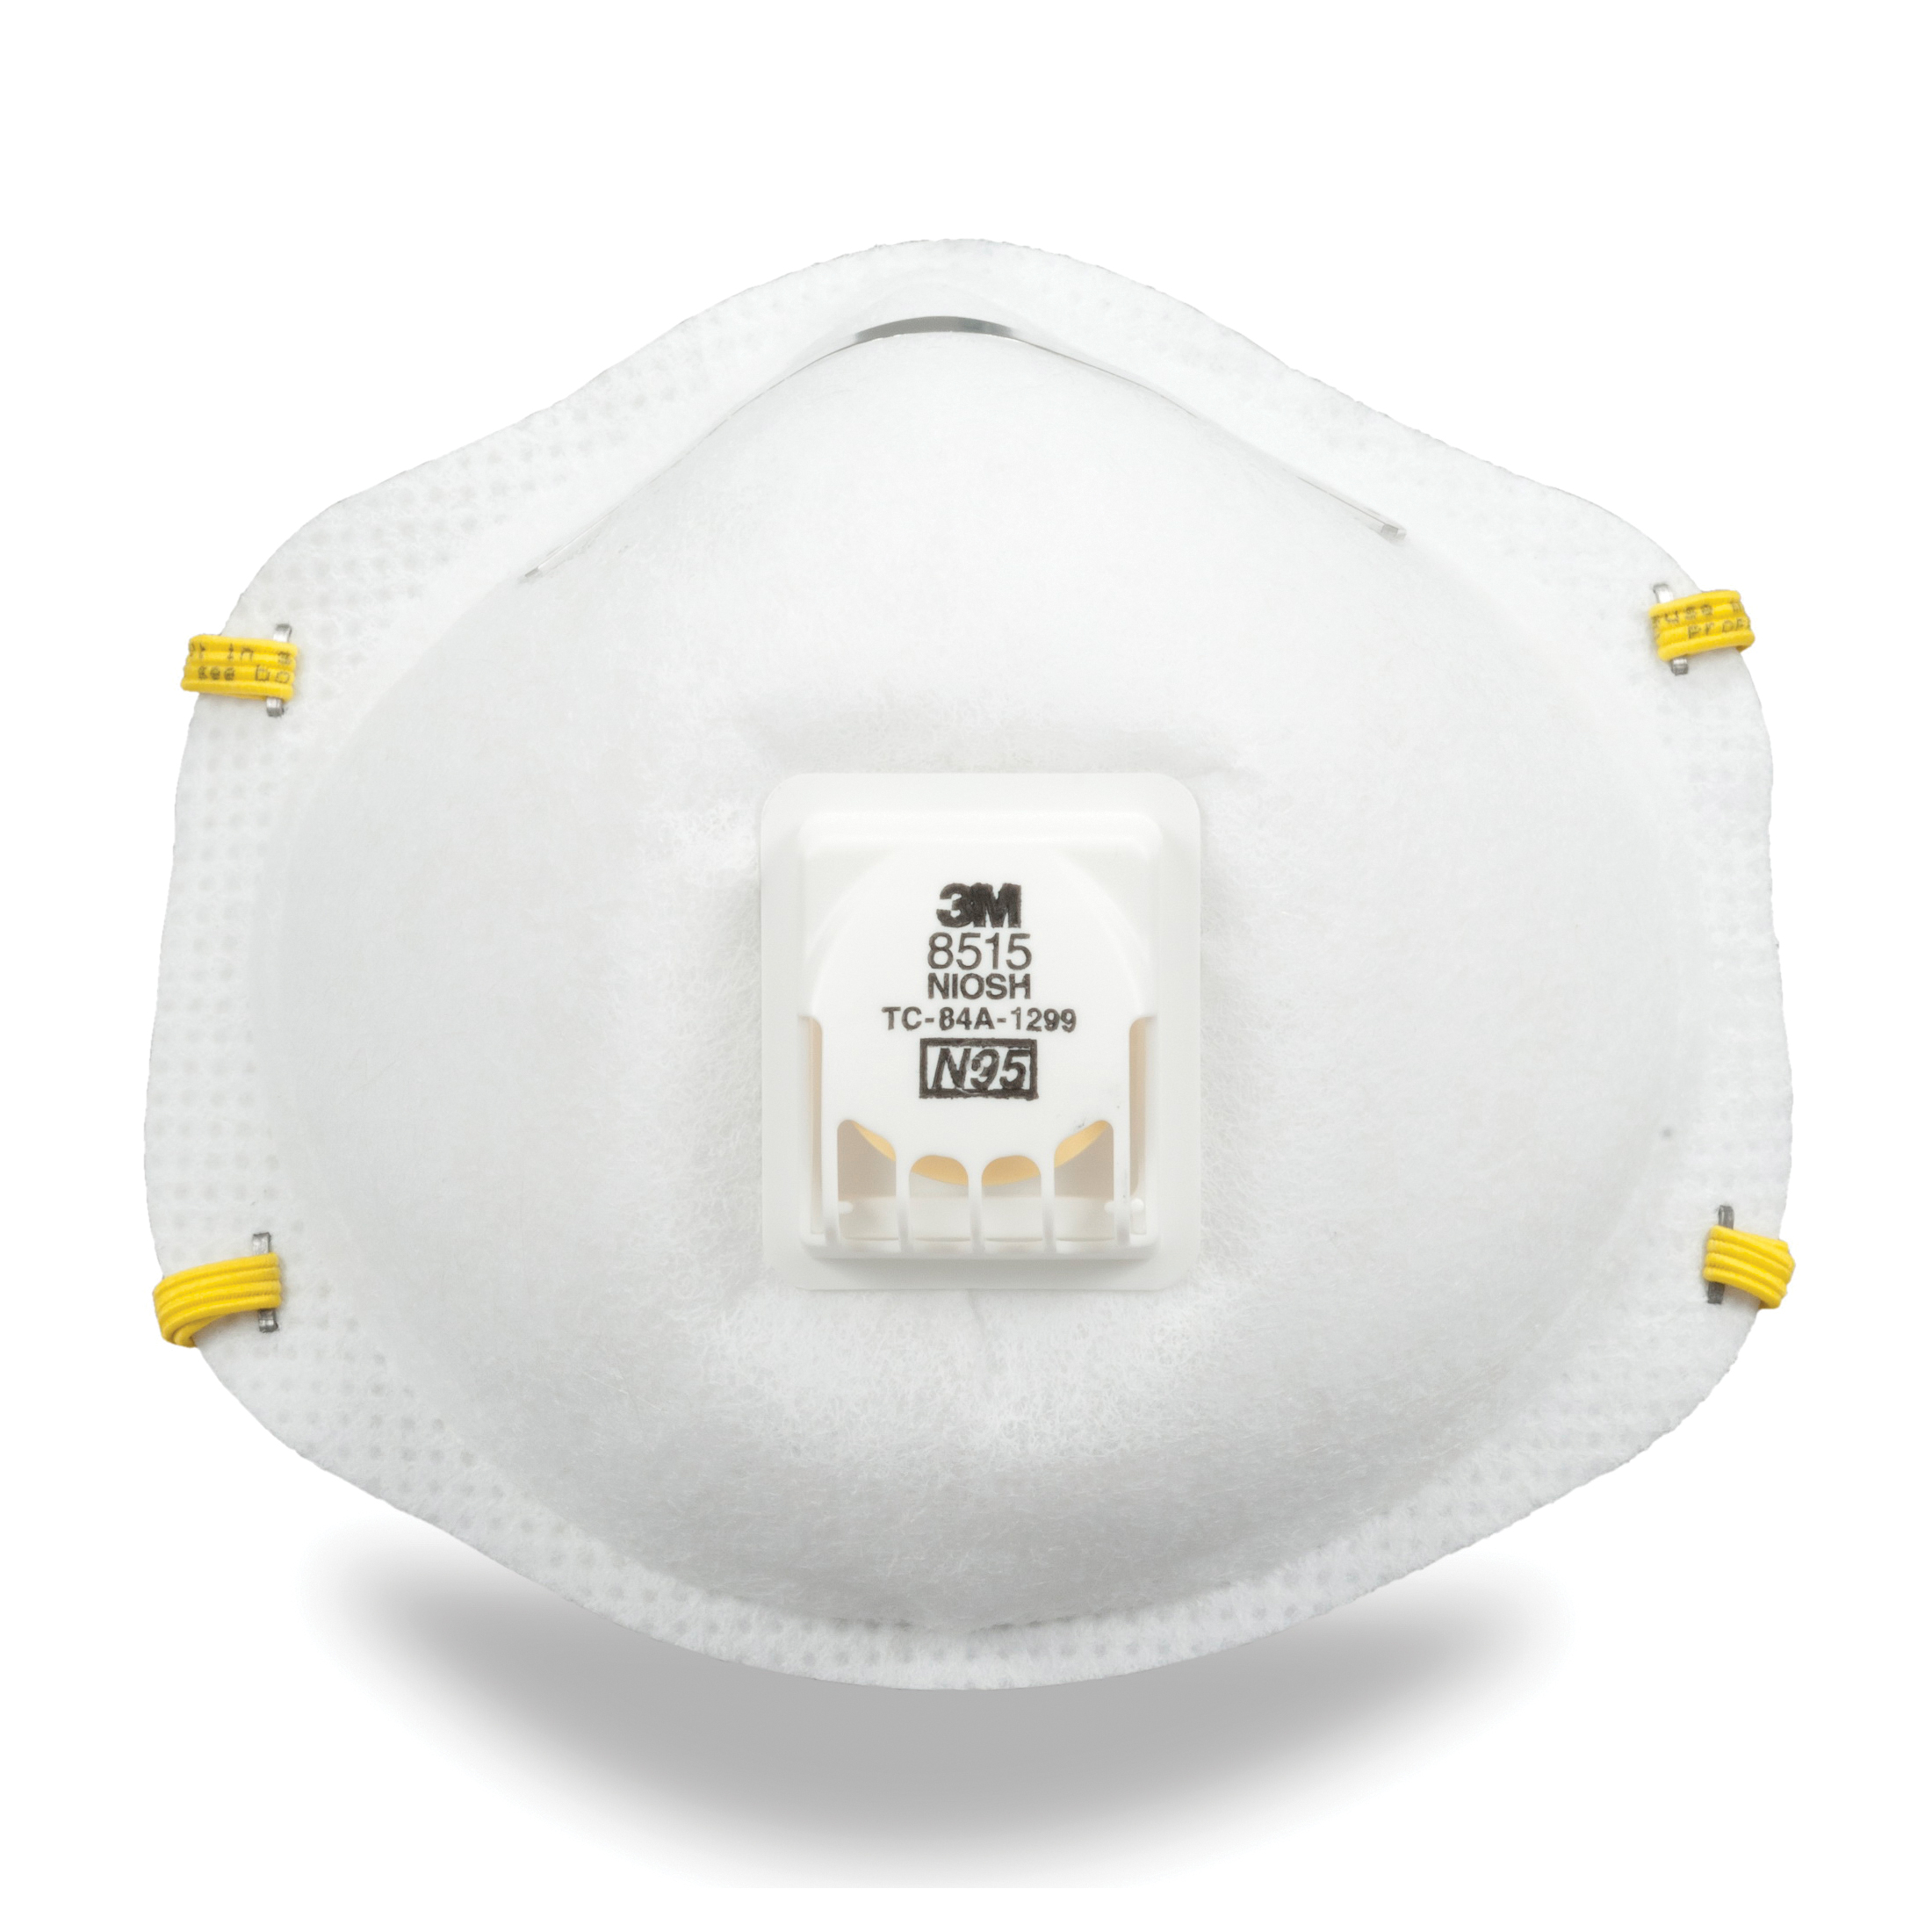 3M™ 051131-07023 8200 Standard Particulate Respirator, Resists: Non-Oil Based Particles